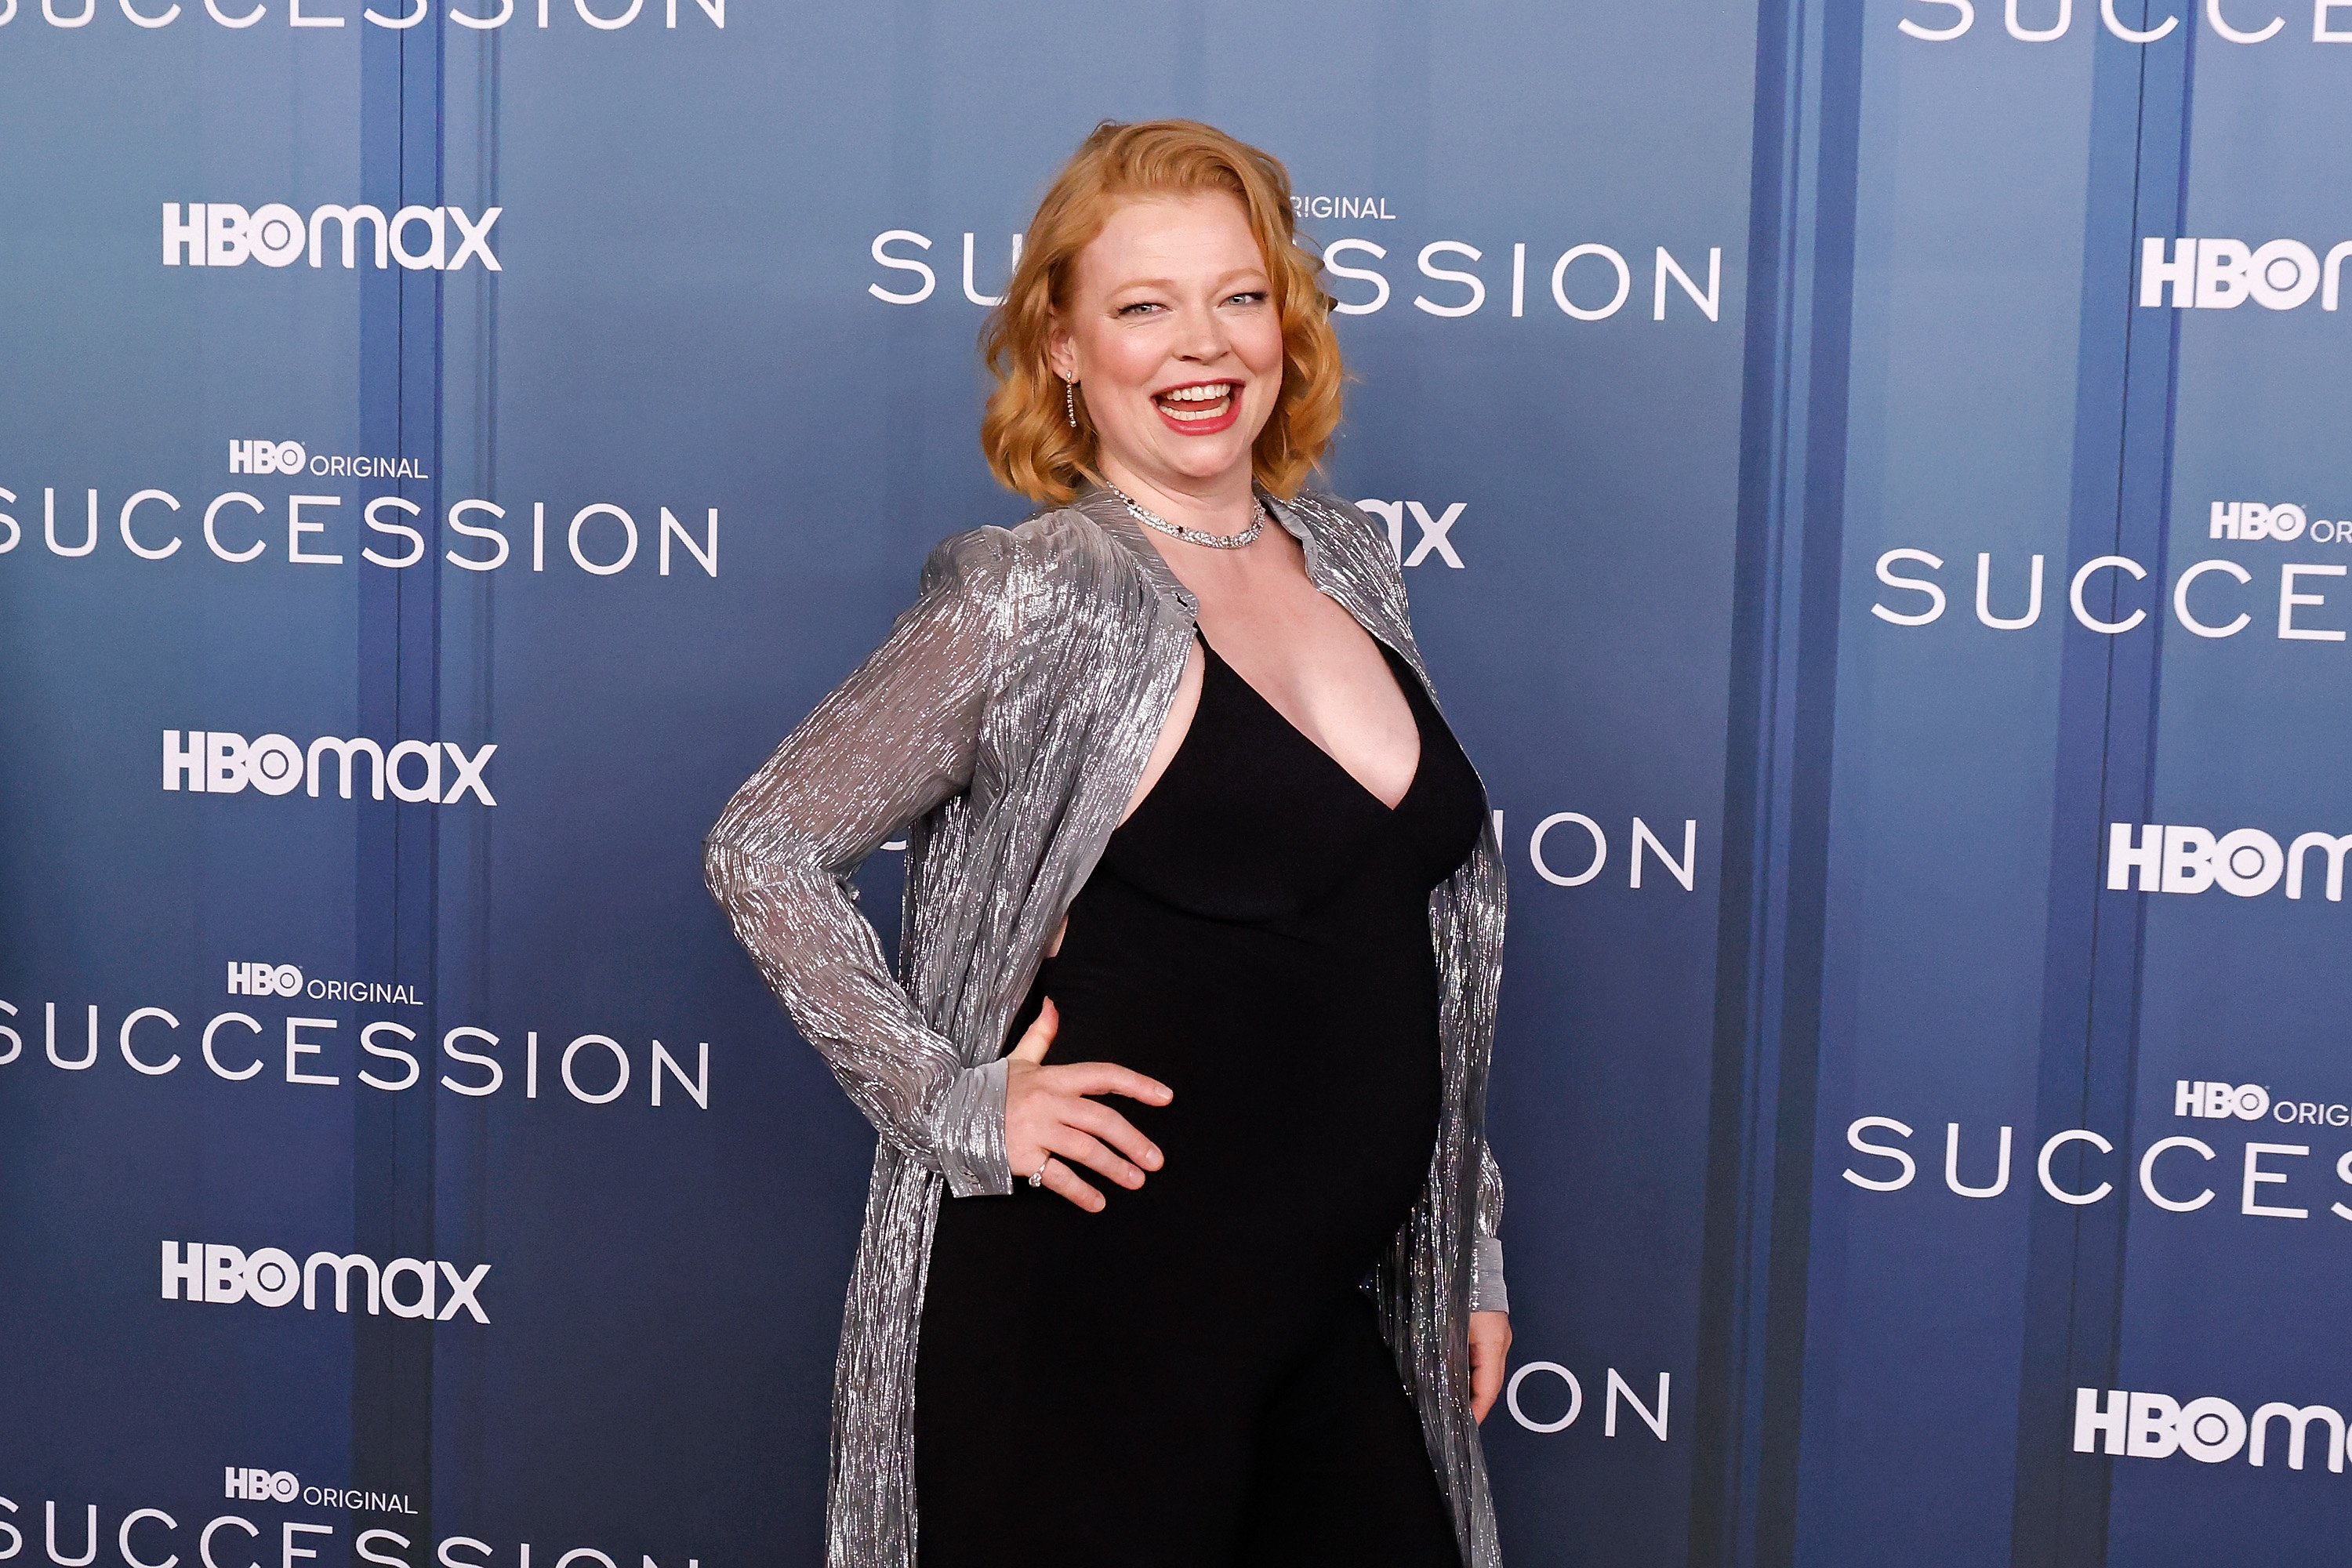 ‘Succession’ Star Sarah Snook Welcomes Baby – NBC New York